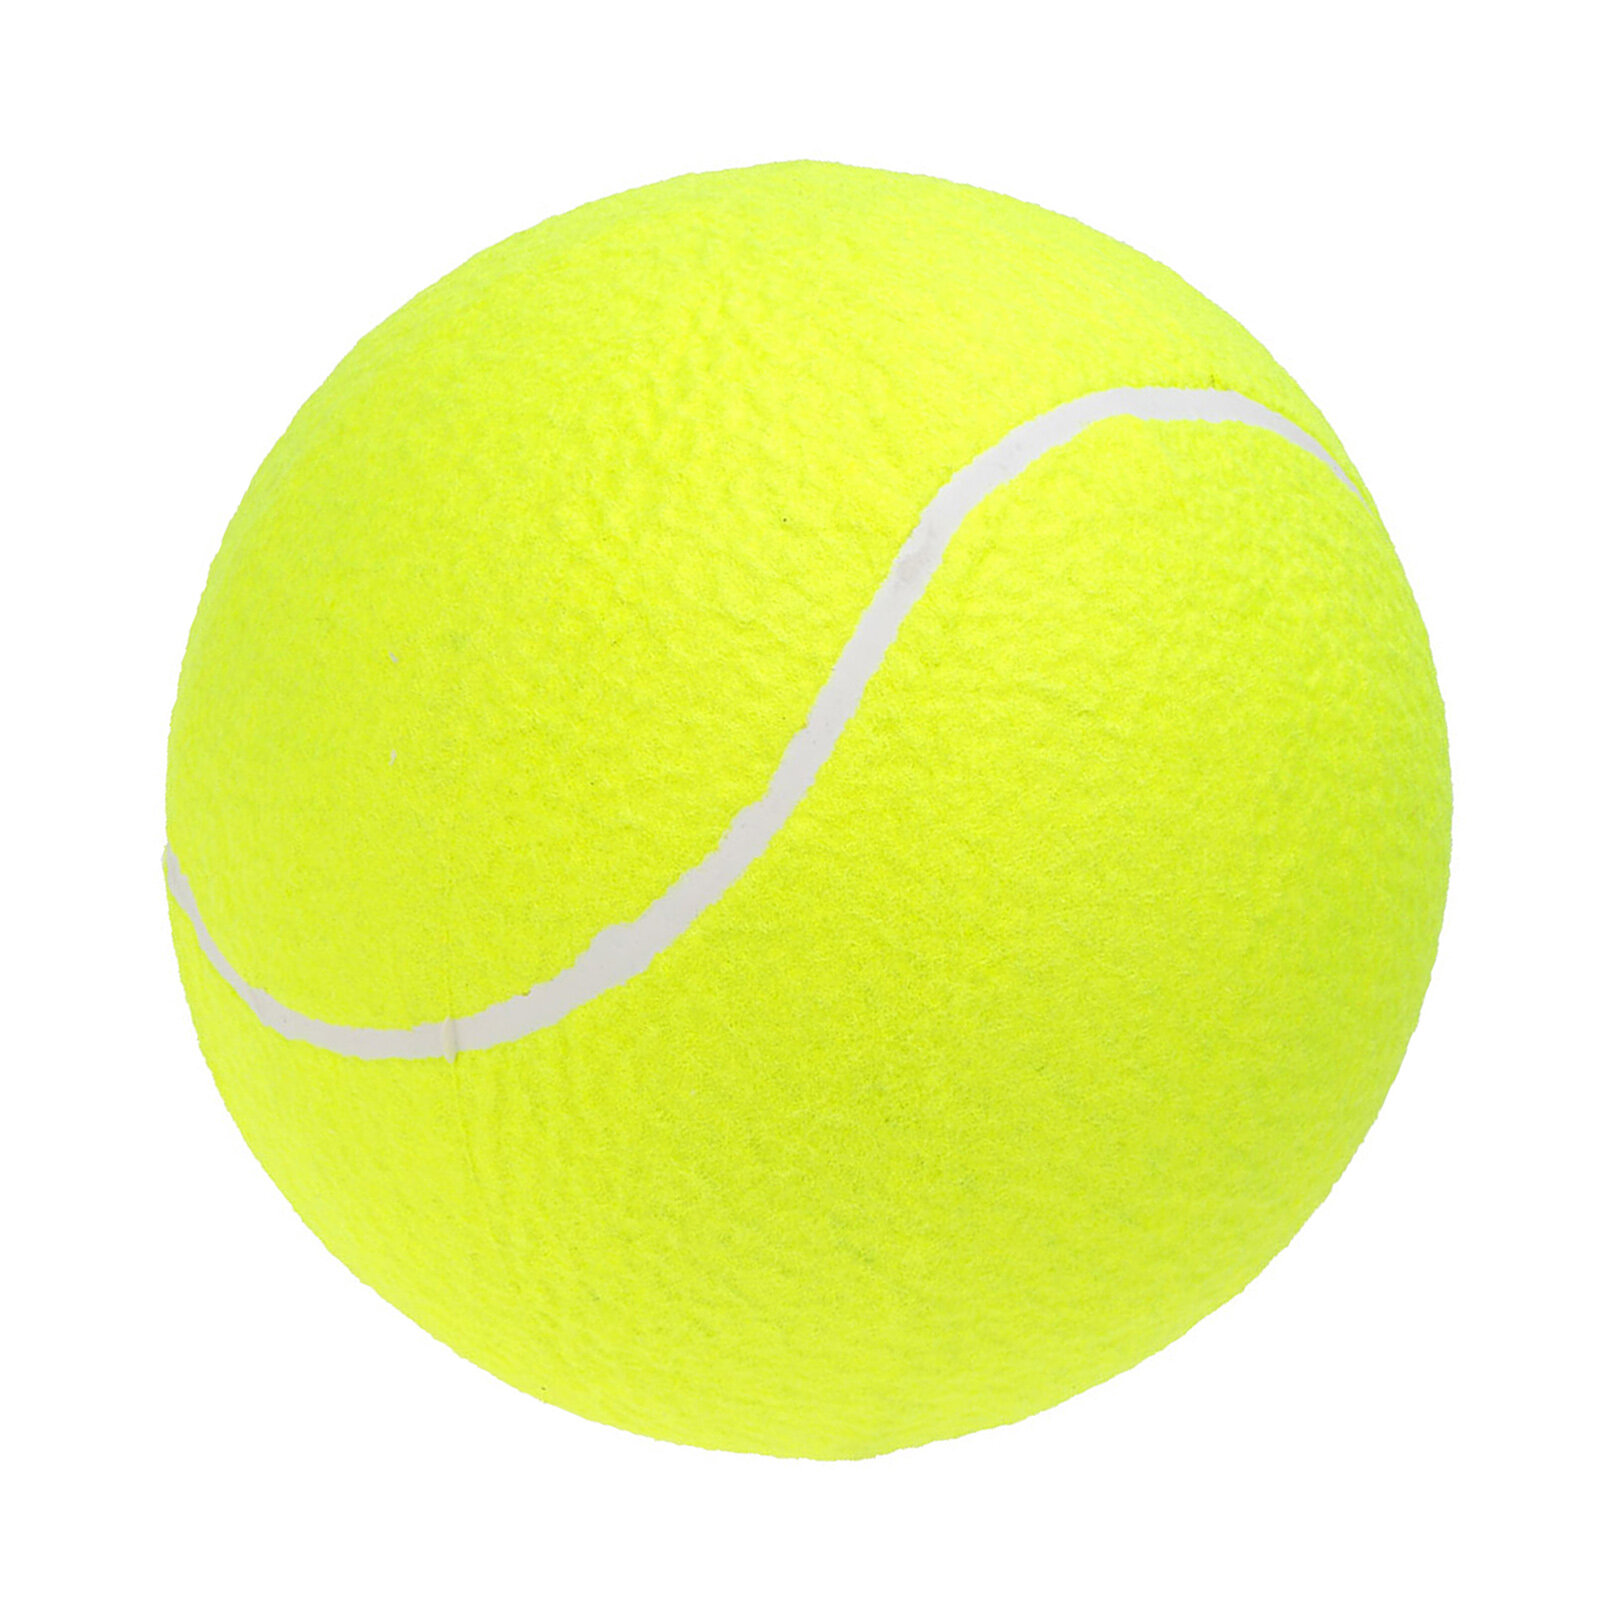 Giant Tennis Ball For Pet Chew Toy Big Inflatable Tennis Ball Signature Mega Jumbo Pet Toy Ball Supplies Outdoor Cricket New In